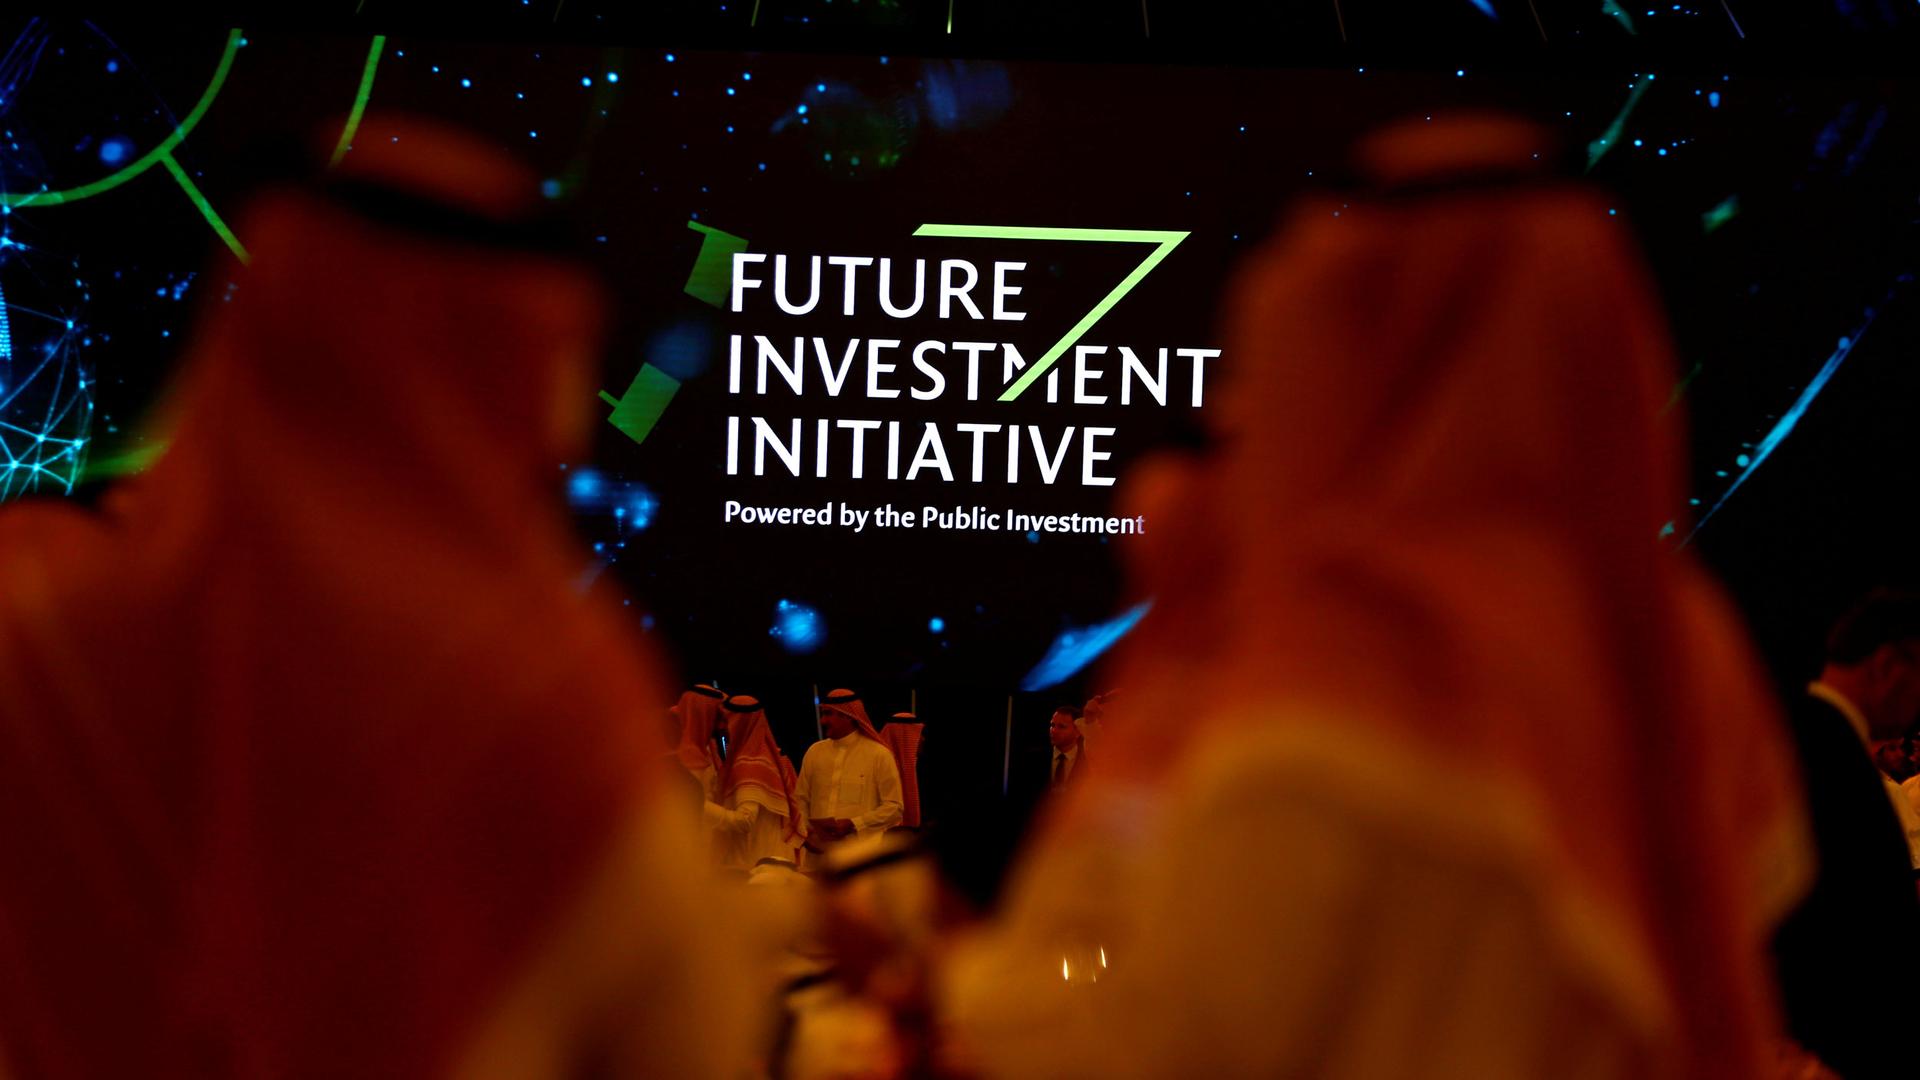 A sign reading "Future Investment Initiative" is visible between the heads of two men